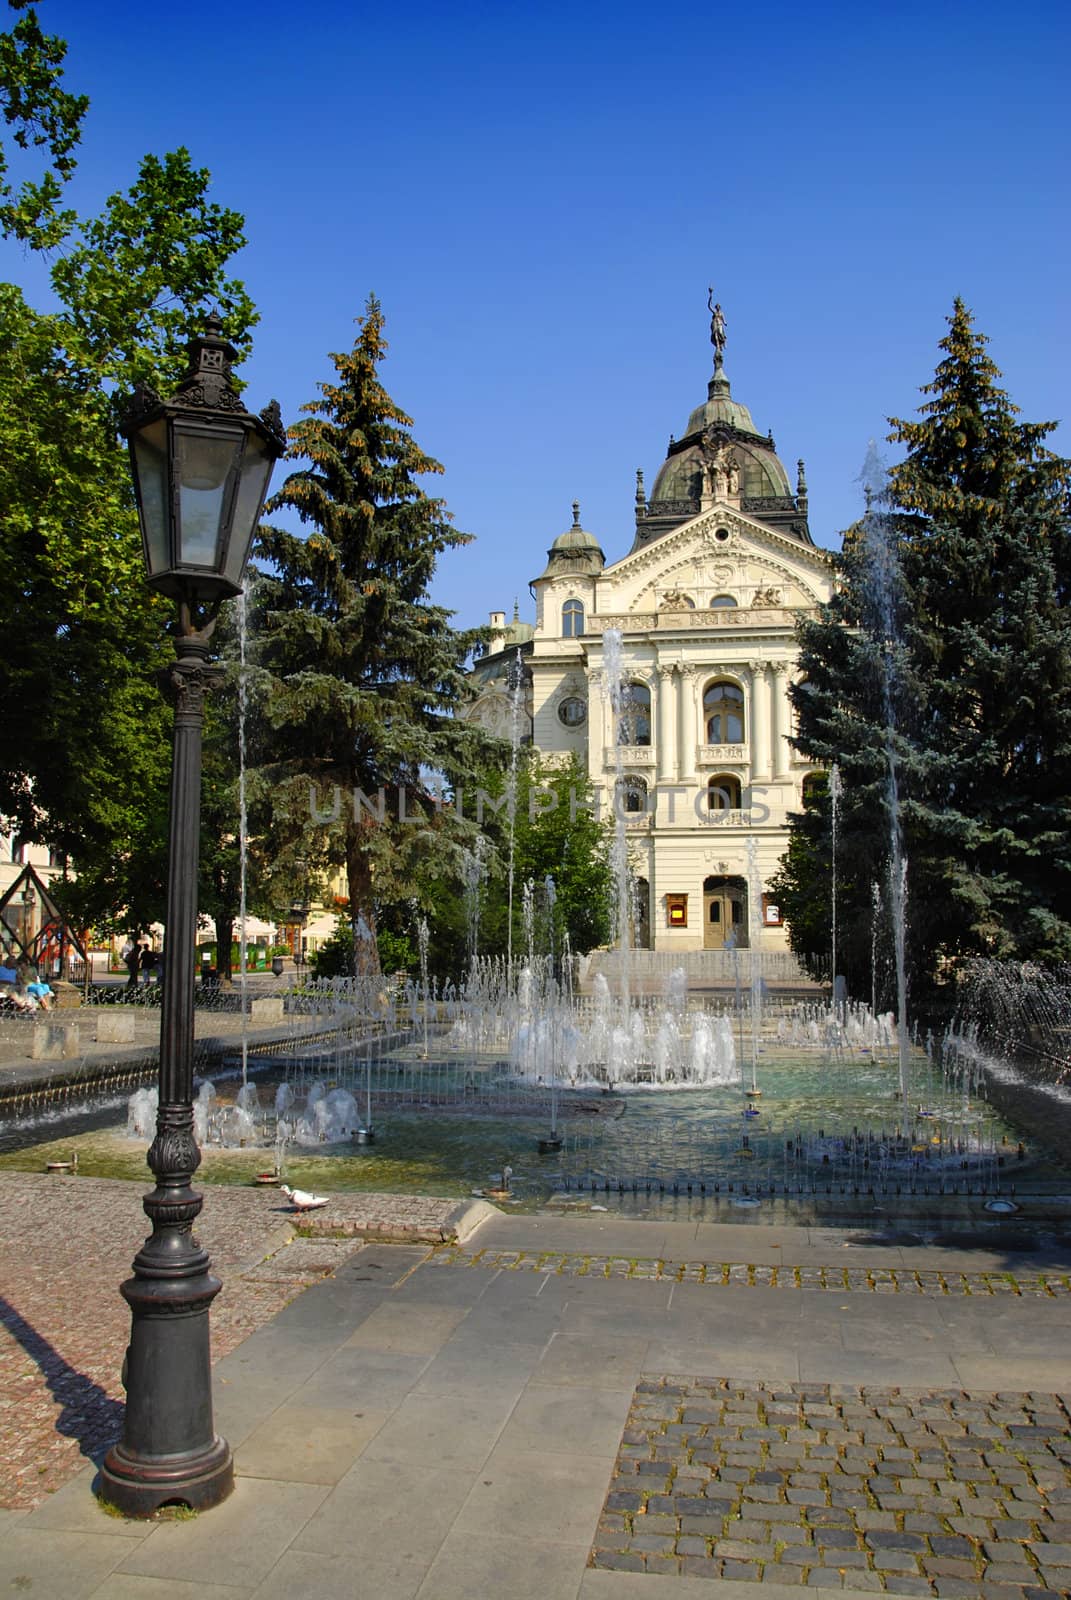 City Hall of slovakian city Kosice with fountains and lantern in front of it